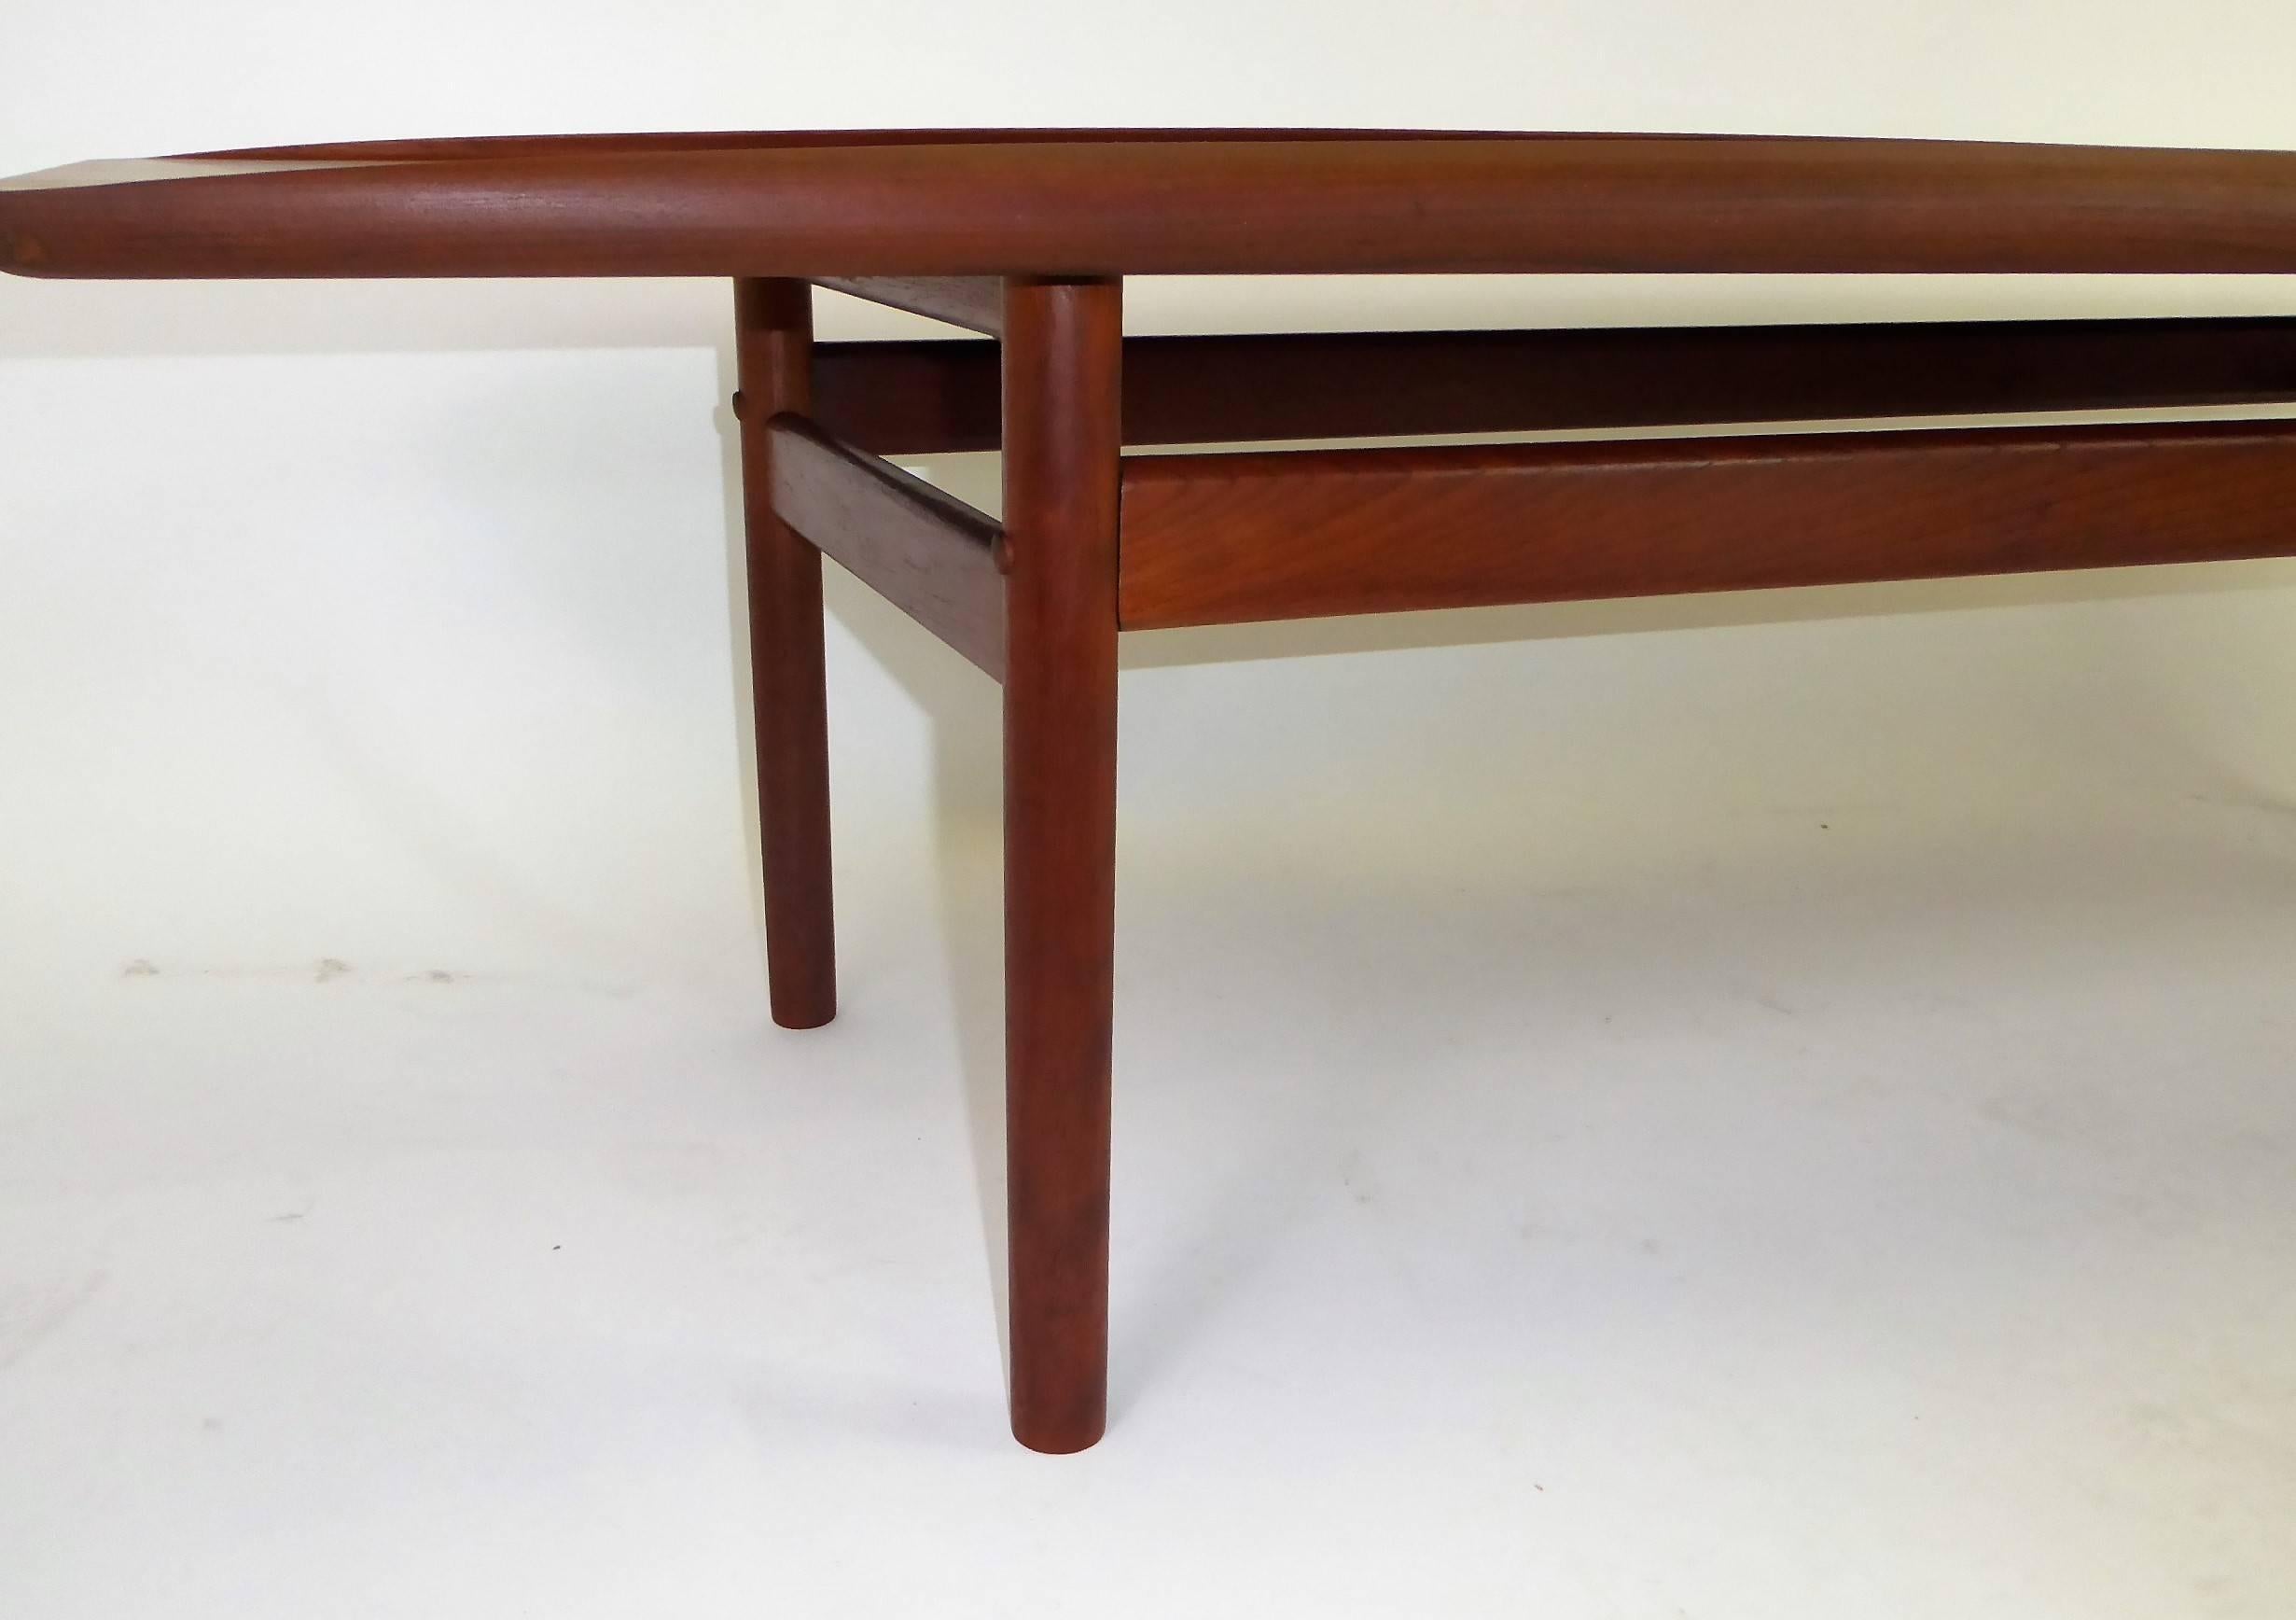 1960s Grete Jalk Surfboard Coffee Table for Poul Jeppesen 1